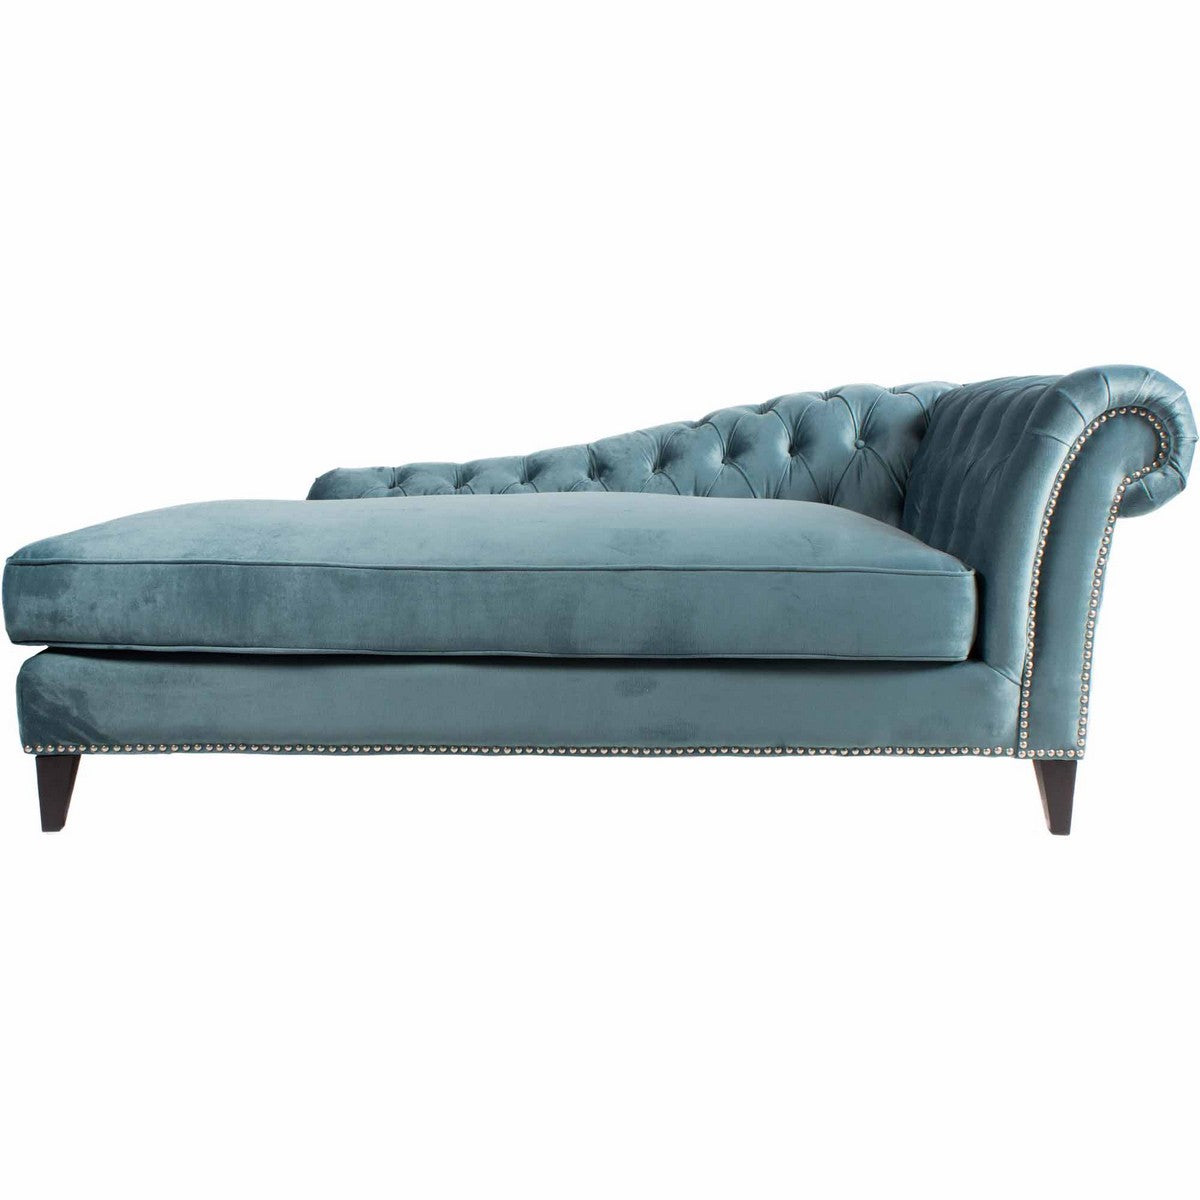 Moe's Home Collection Bibiano Chaise Velvet Blue - FN-1031-50 - Moe's Home Collection - chaise lounges - Minimal And Modern - 1